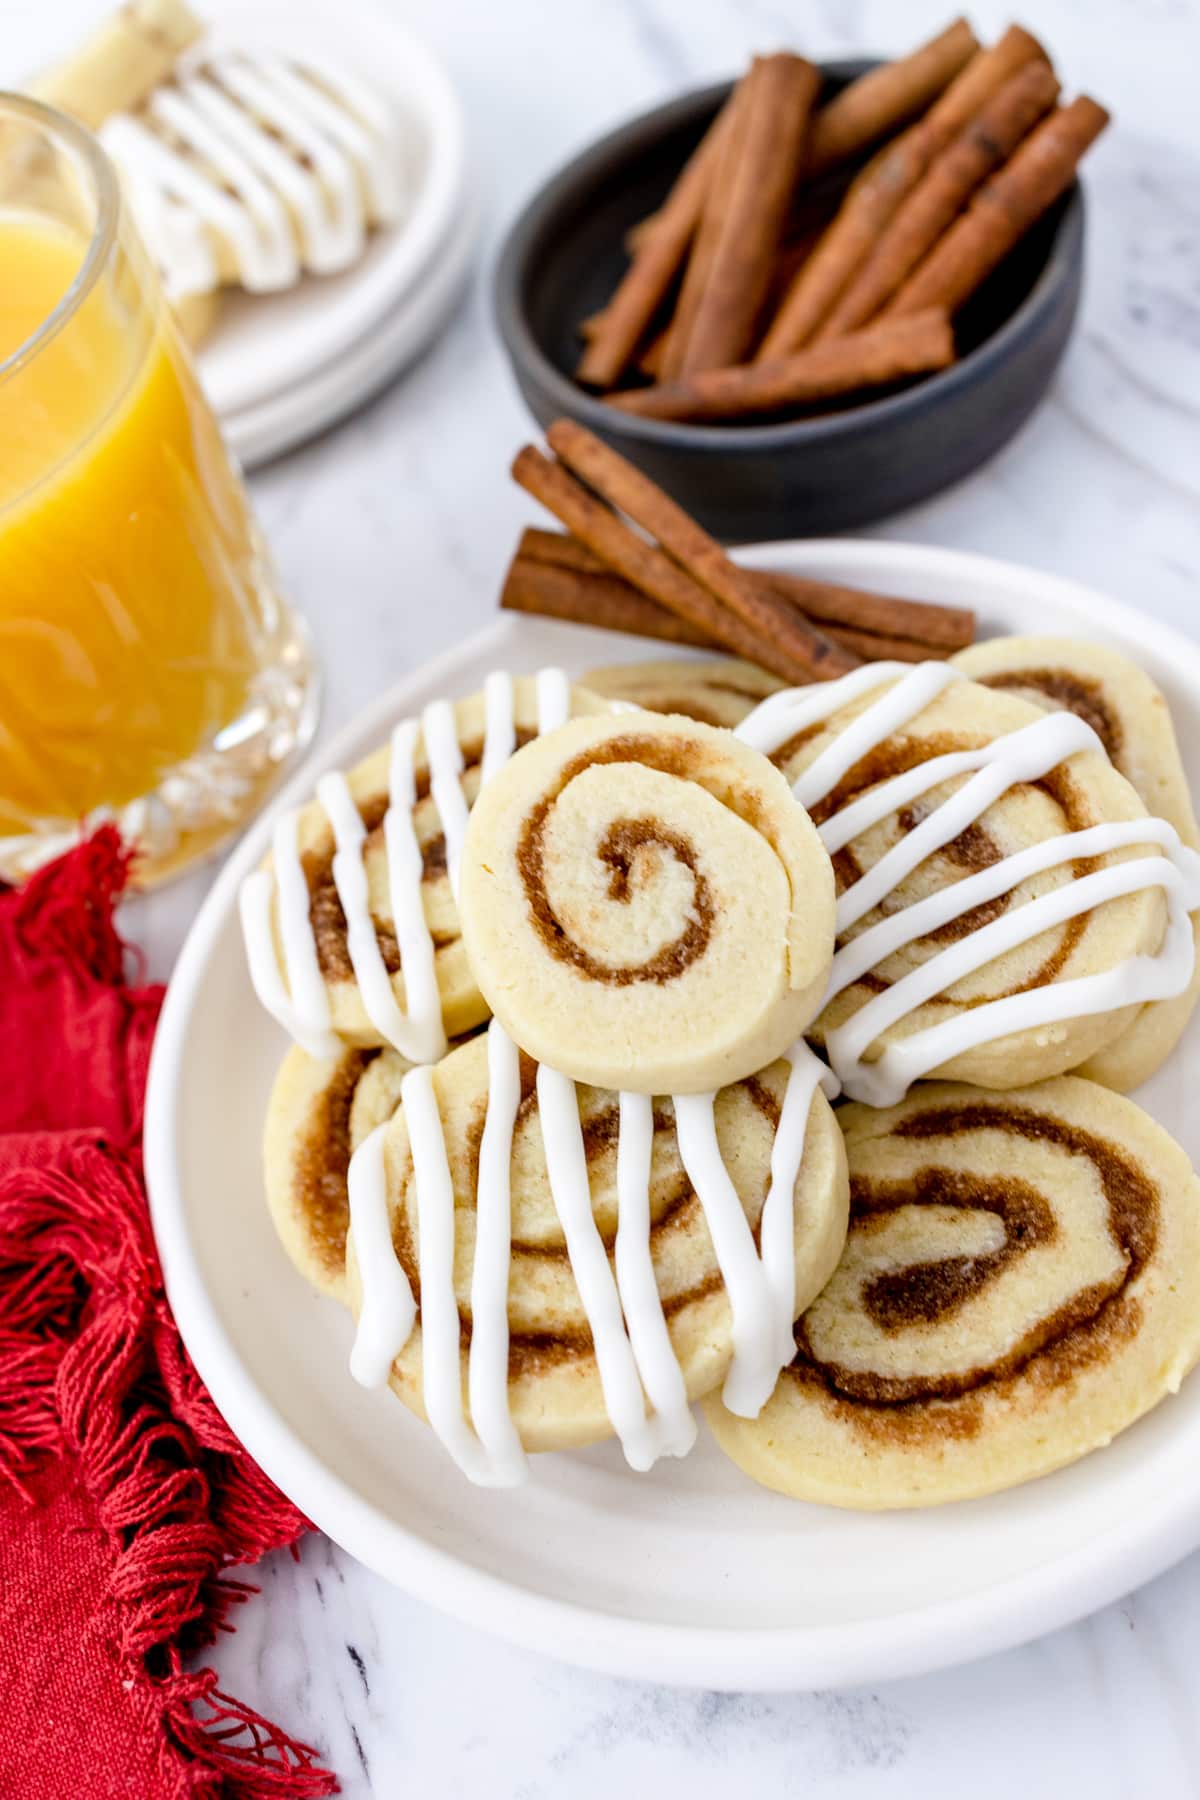 A plate filled with cinnamon swirl cookies with a bowl of cinnamon sticks next to it.